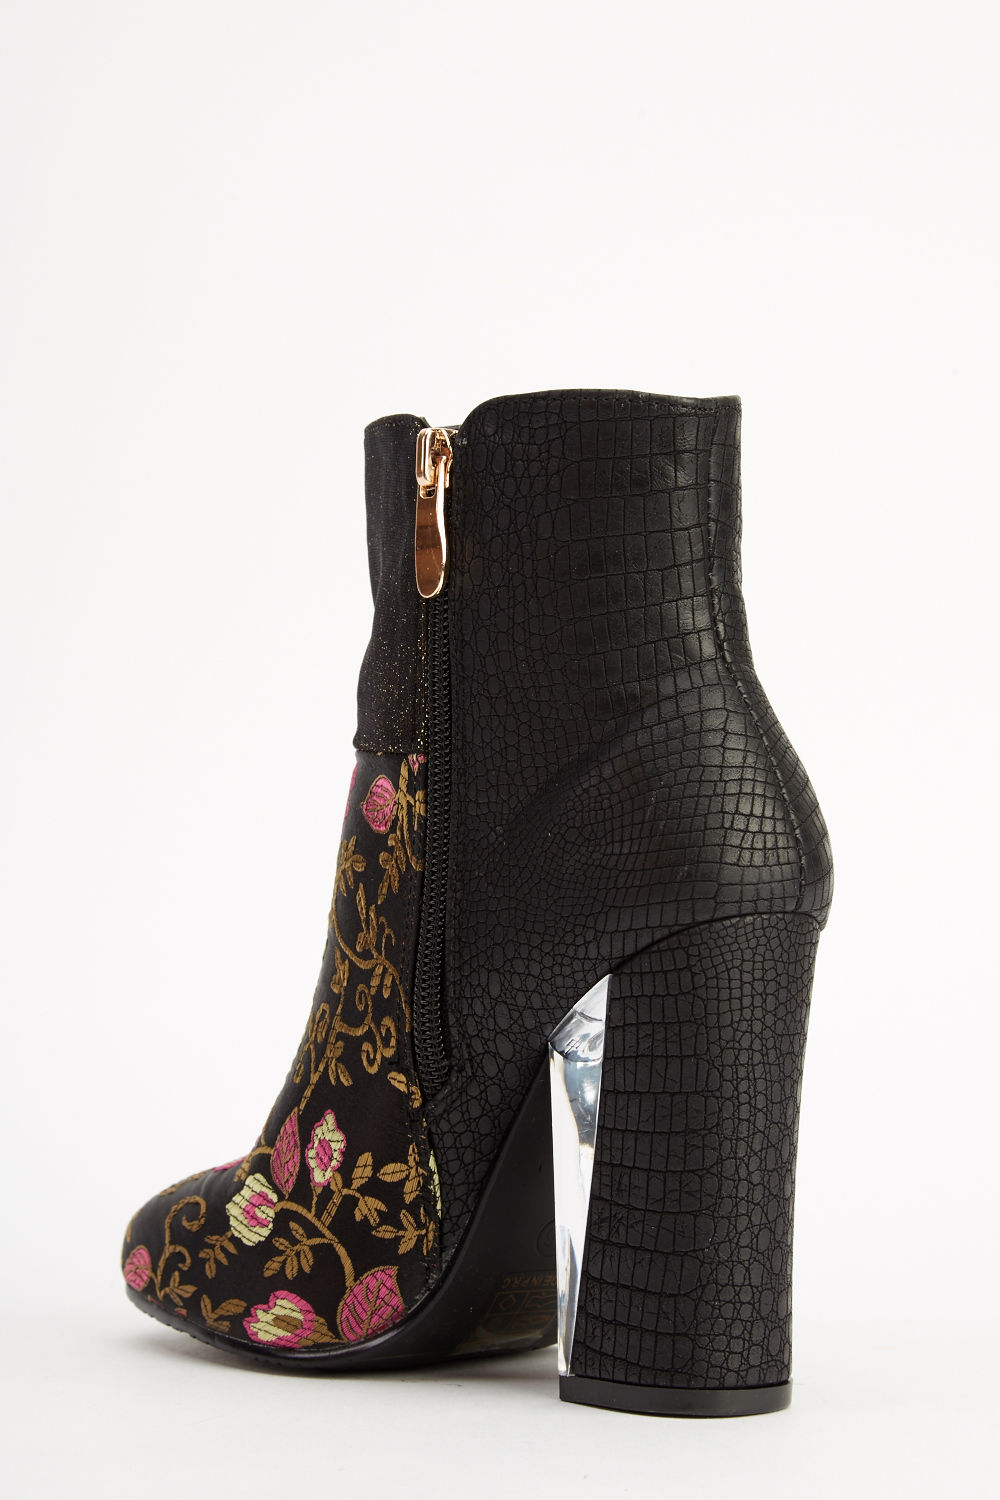 Sergio Todzi Floral Contrast Heeled Boots - Just $6